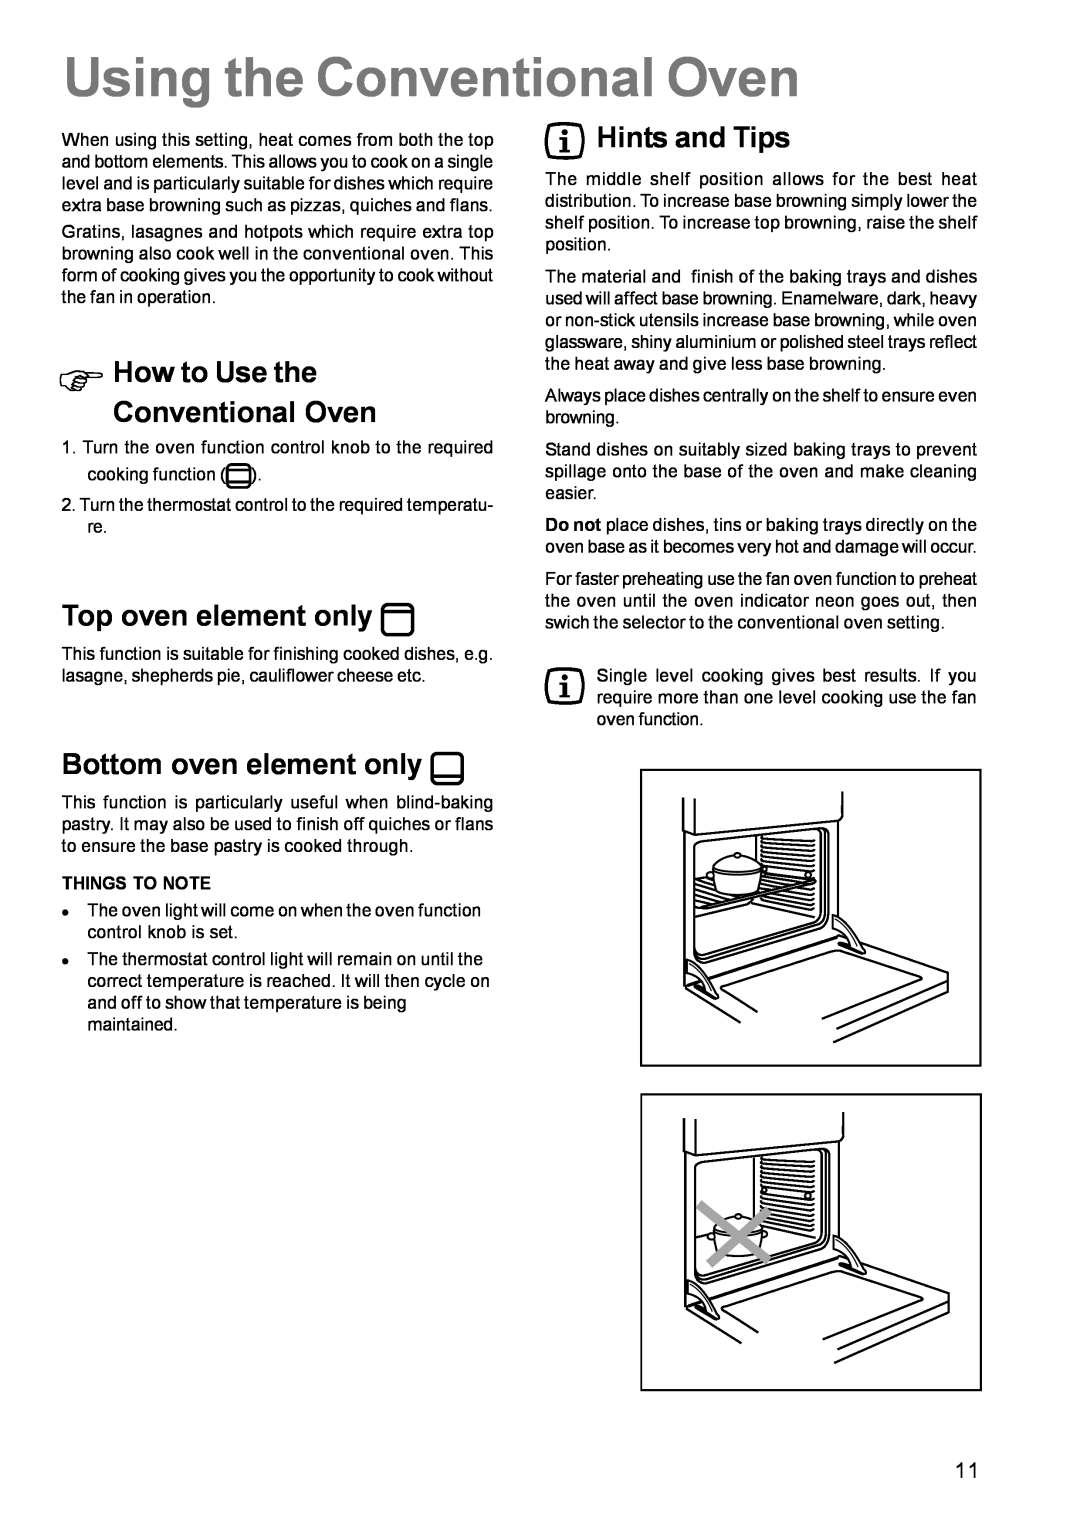 Zanussi ZCE 631 Using the Conventional Oven, Φ How to Use the Conventional Oven, Top oven element only, Hints and Tips 